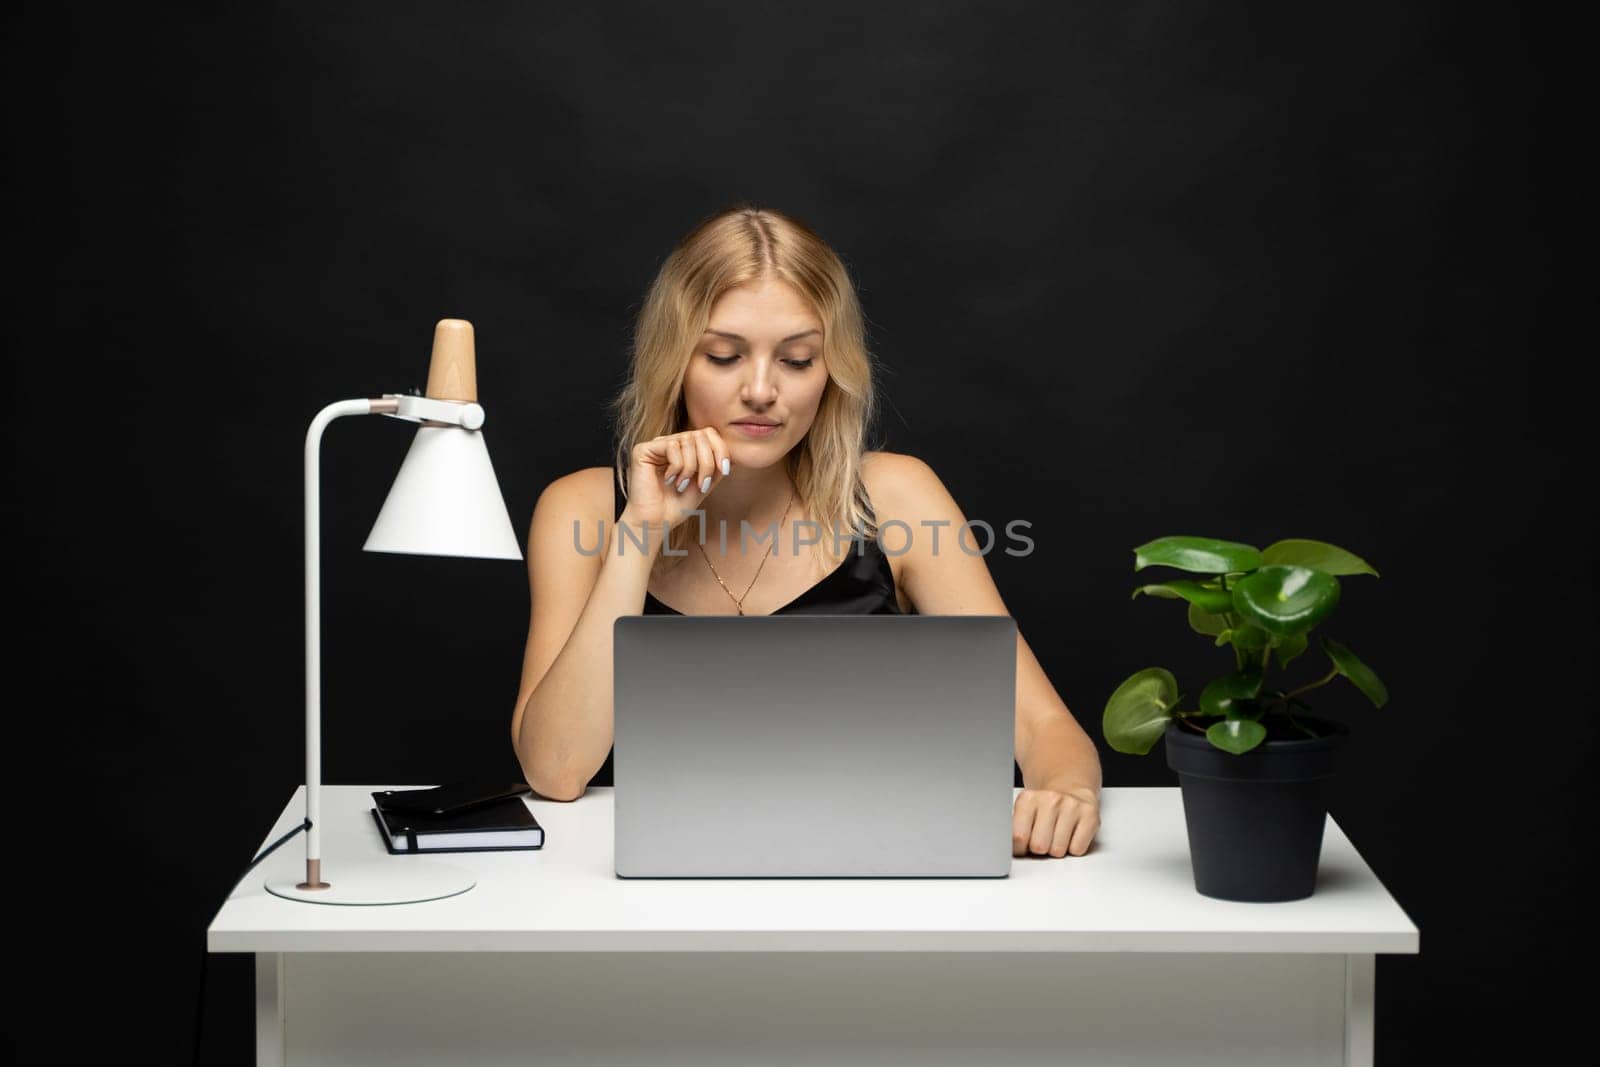 Portrait of a pretty young woman studying while sitting at the table with grey laptop computer, notebook. Smiling business woman working with a laptop isolated on a grey background